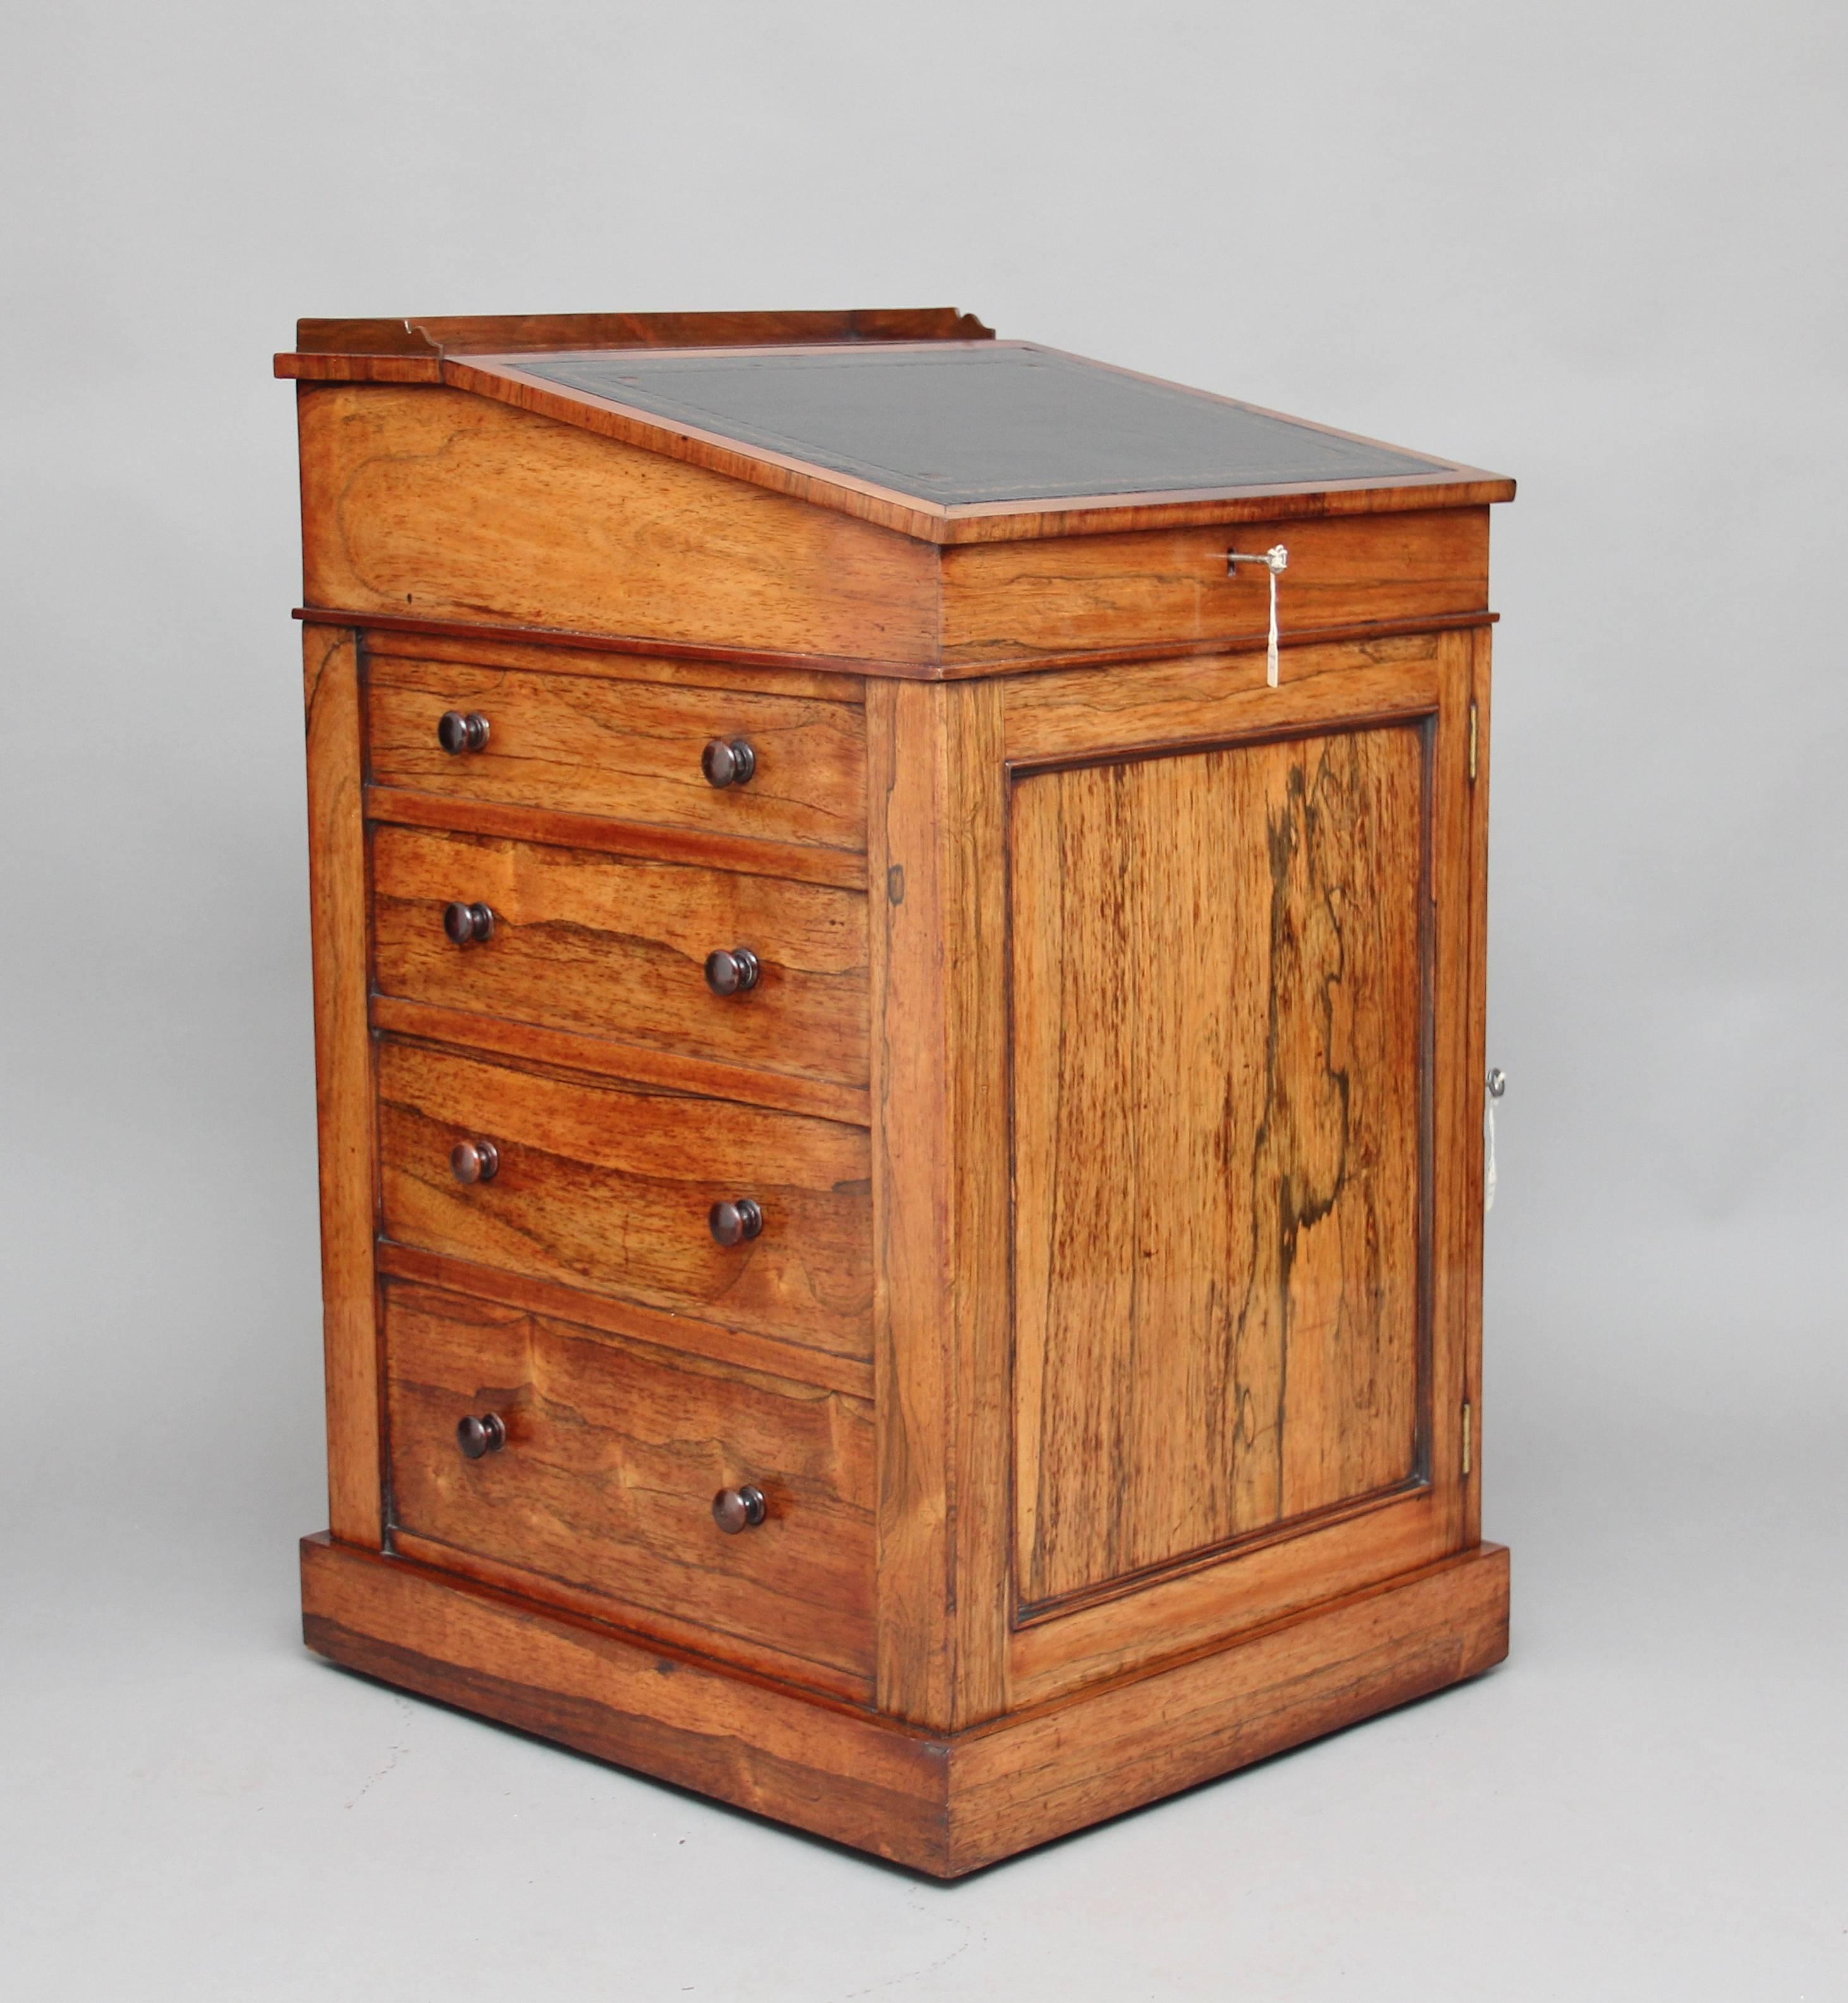 Early 19th century rosewood Davenport with four mahogany lined drawers on one side and four dummy drawers on the other side, above them it has a sloping top that slides forward to make it easier to sit and write at, the top has a black leather which